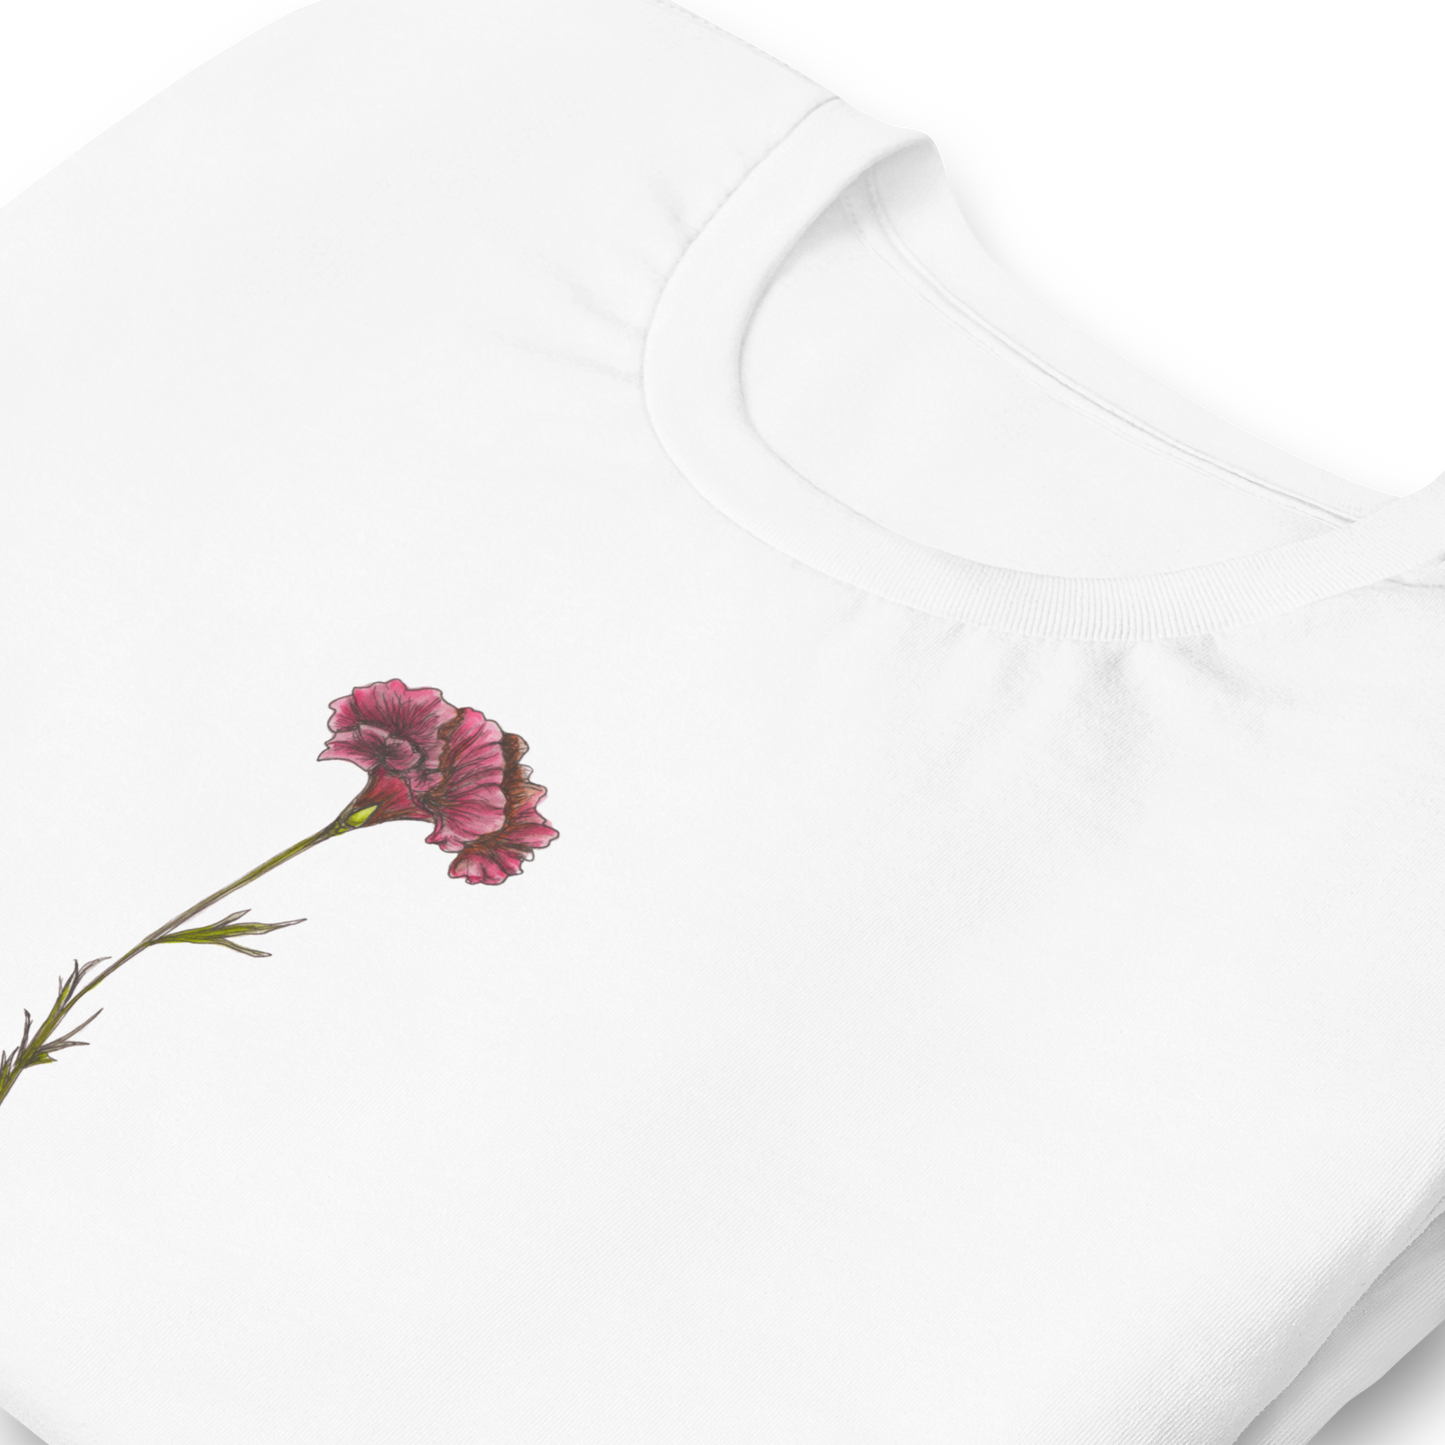 Unisex Only Love. t-shirt with watercolor pink carnation flower drawn by artist Amy-Lynn Denham